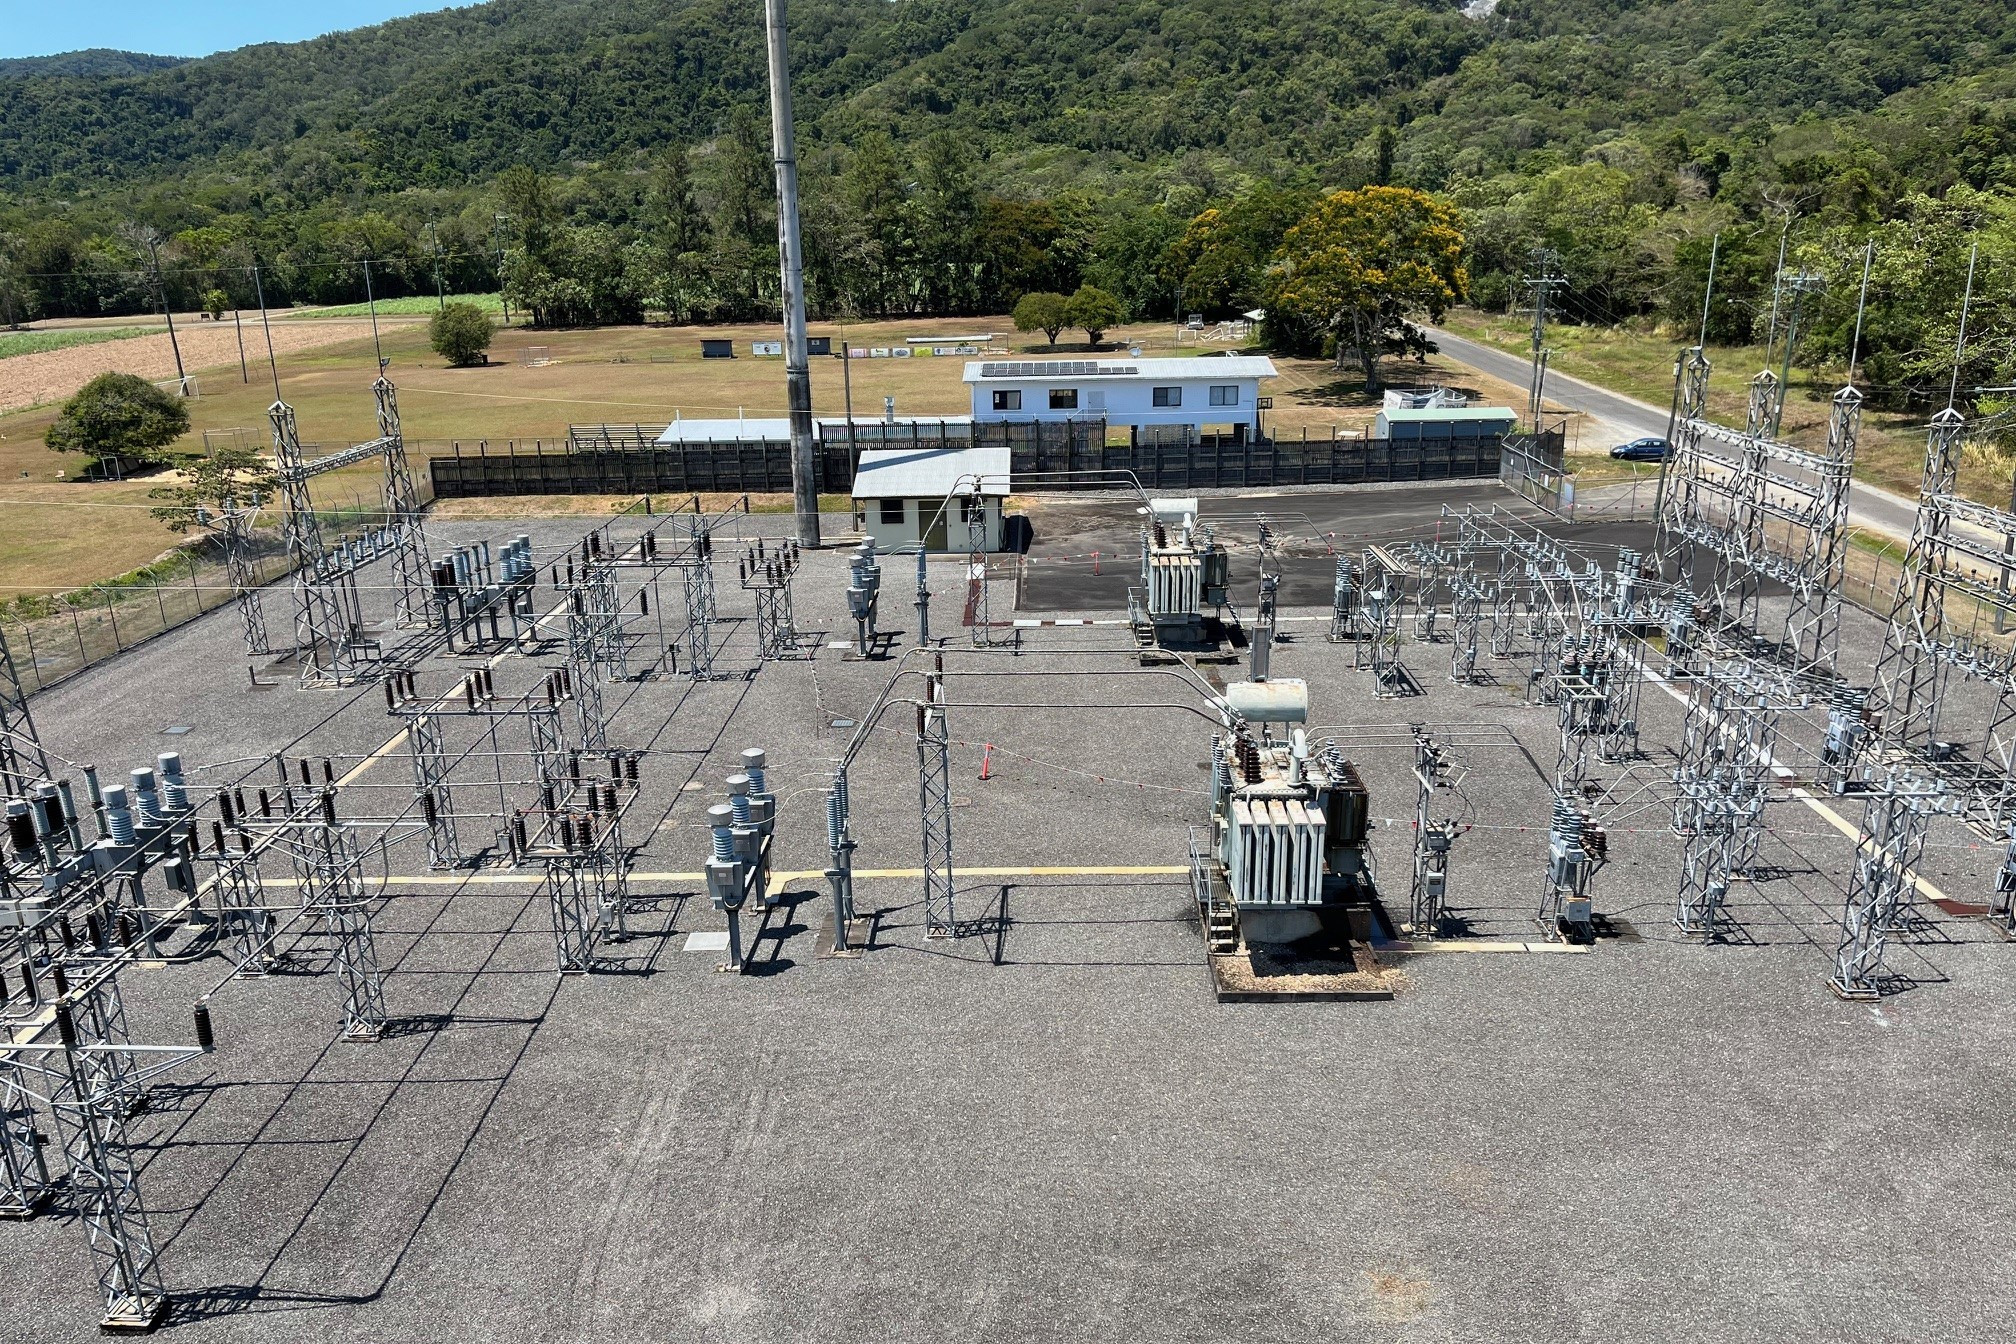 The Mossman Substation site which will be subject of a major upgrade by Ergon Energy. The project is due for completion in early 2025.